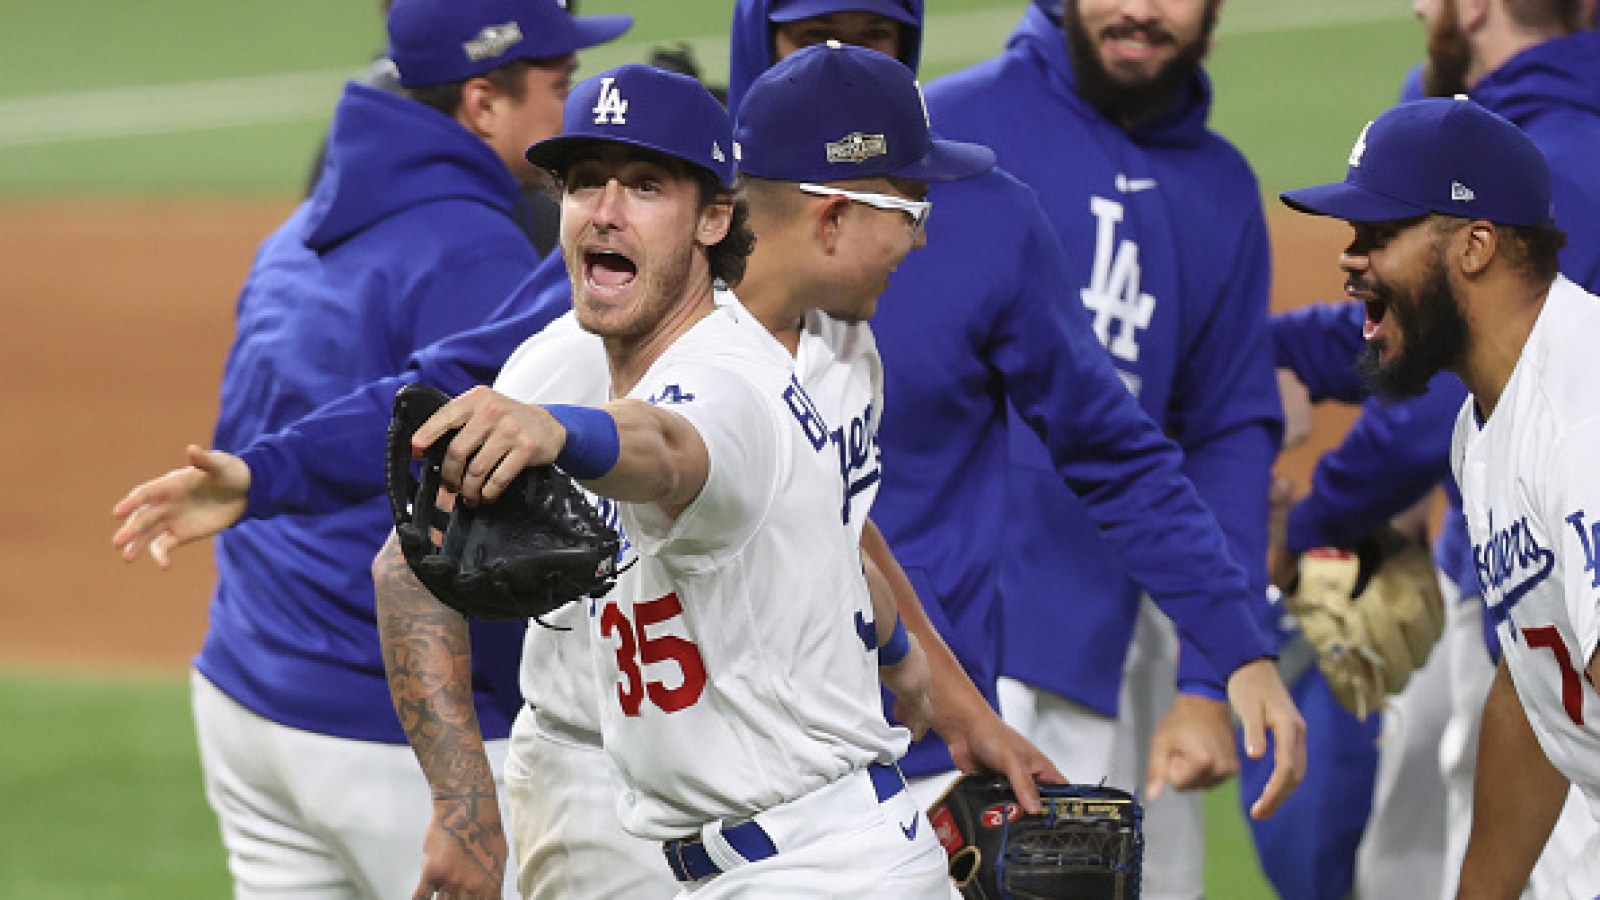 Dodgers win 2020 World Series! (Final out of World Series Game 6